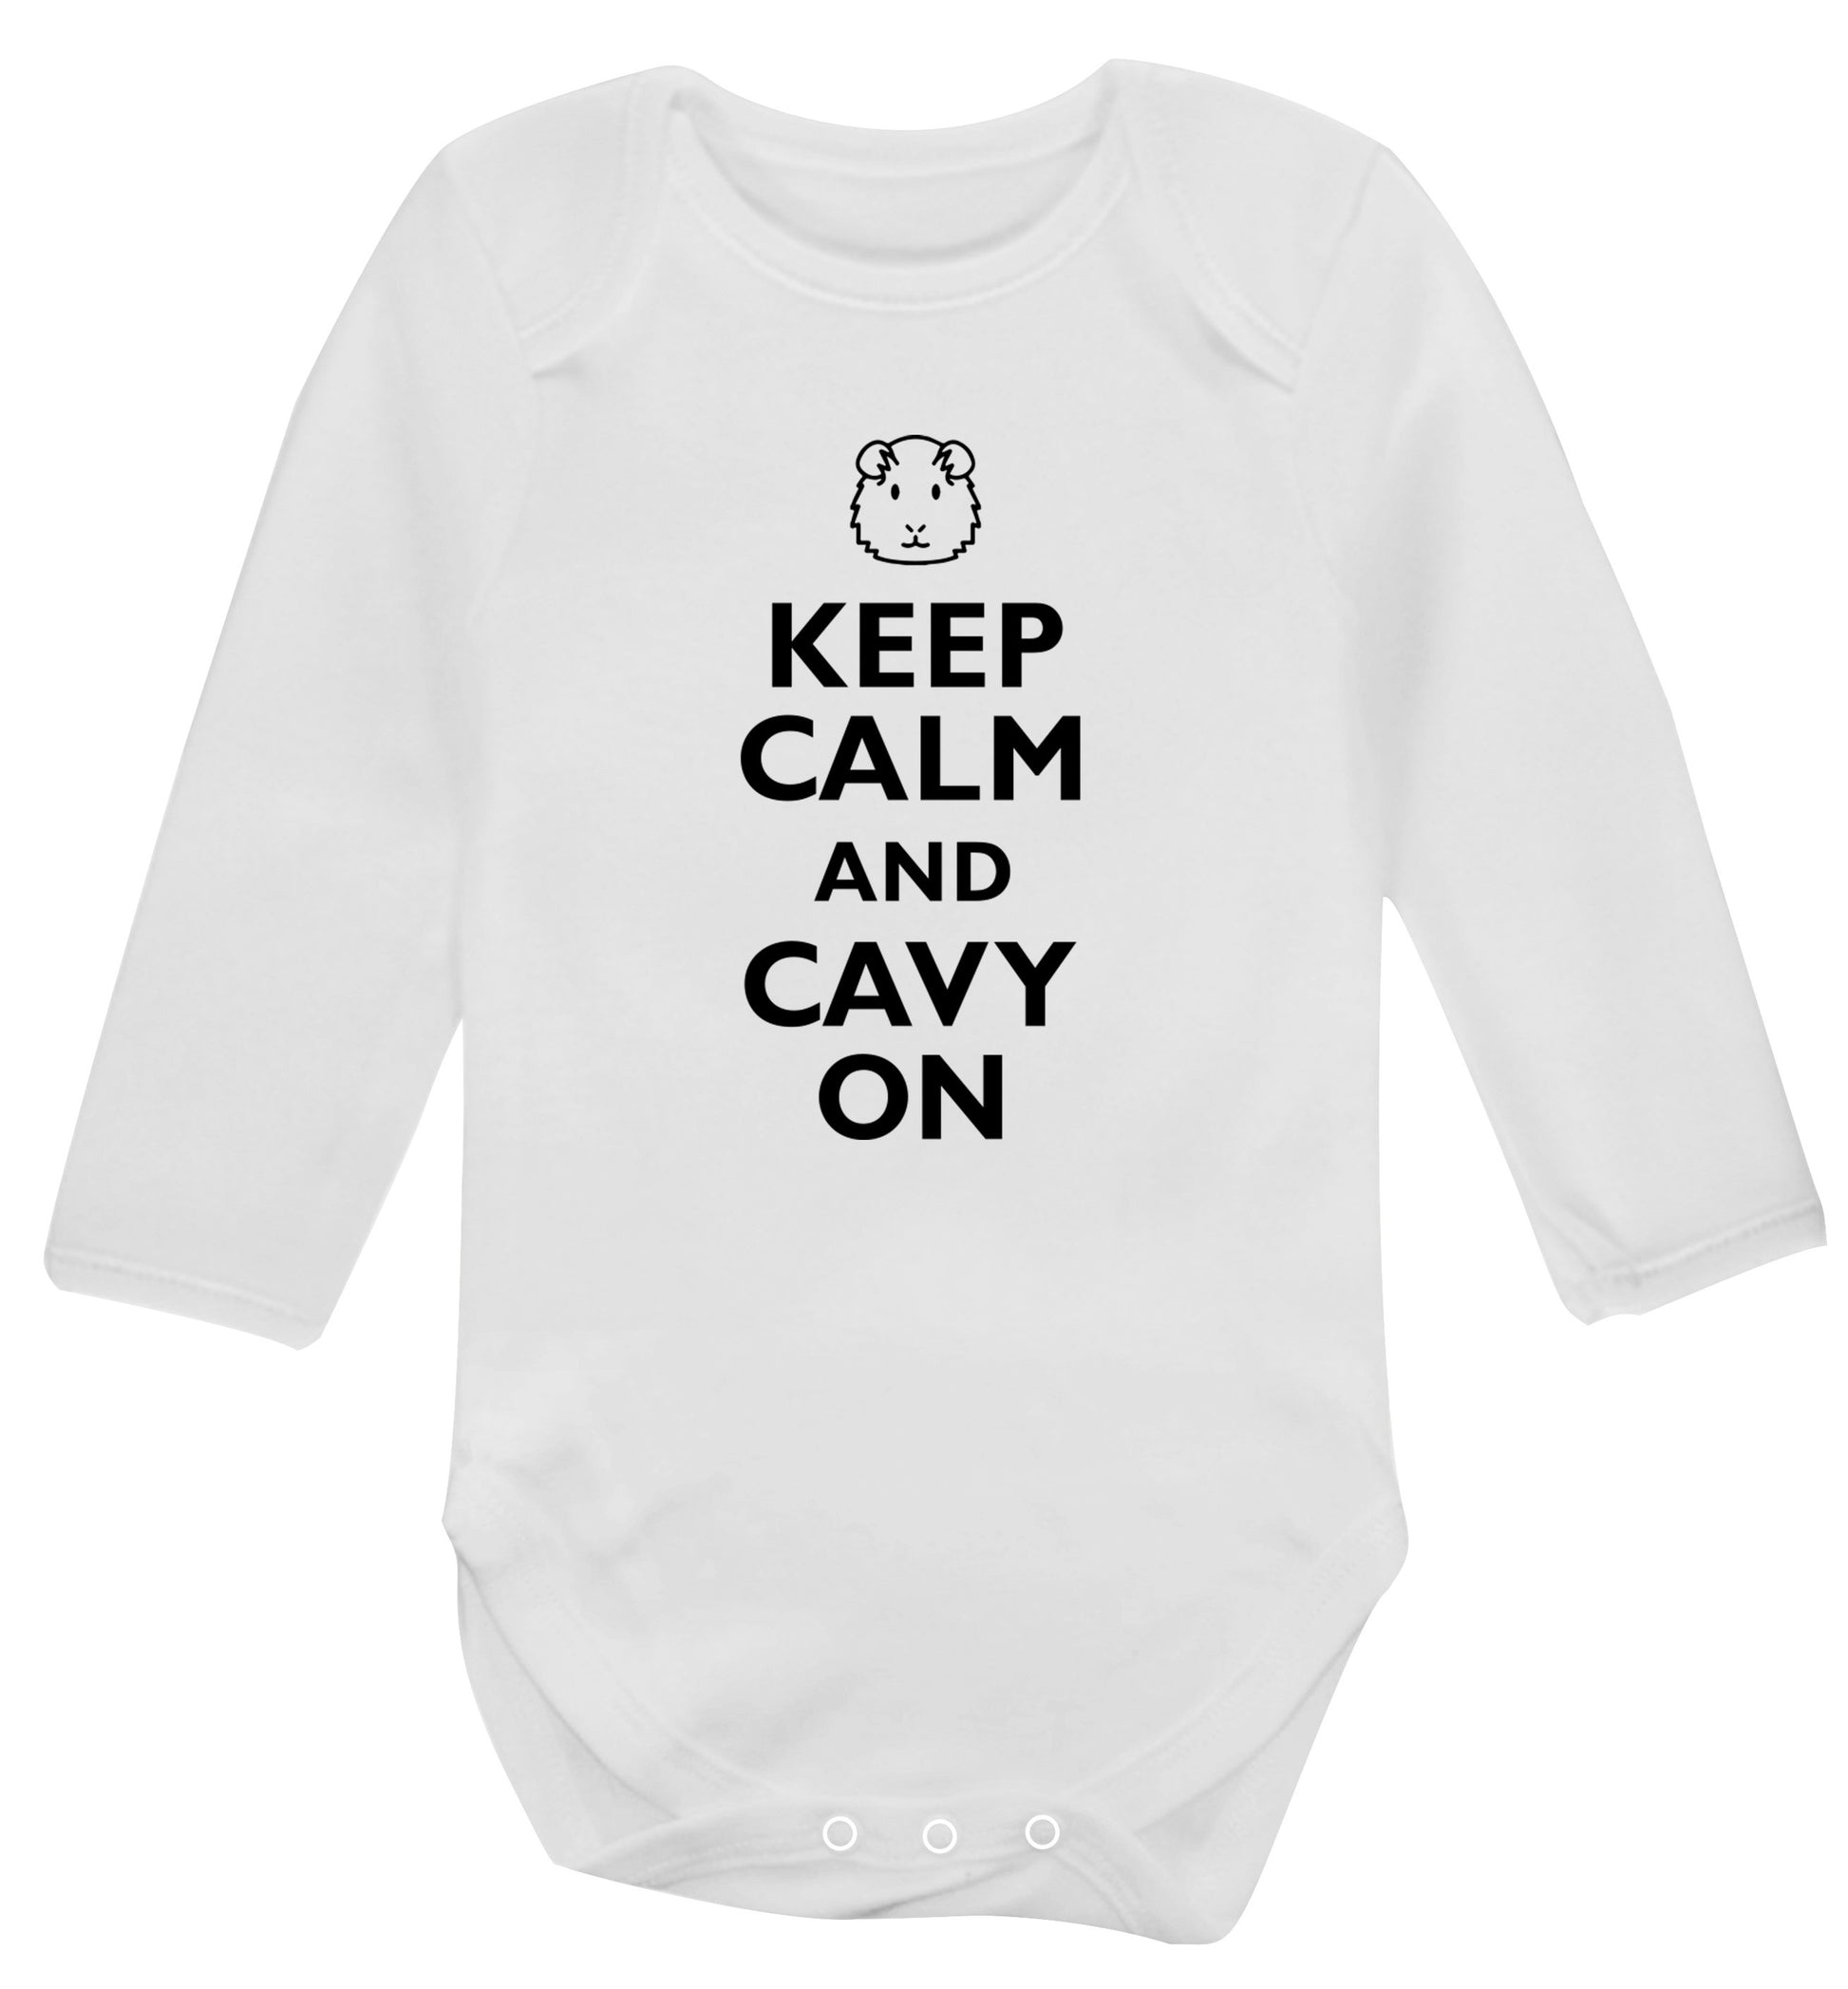 Keep calm and cavvy on Baby Vest long sleeved white 6-12 months